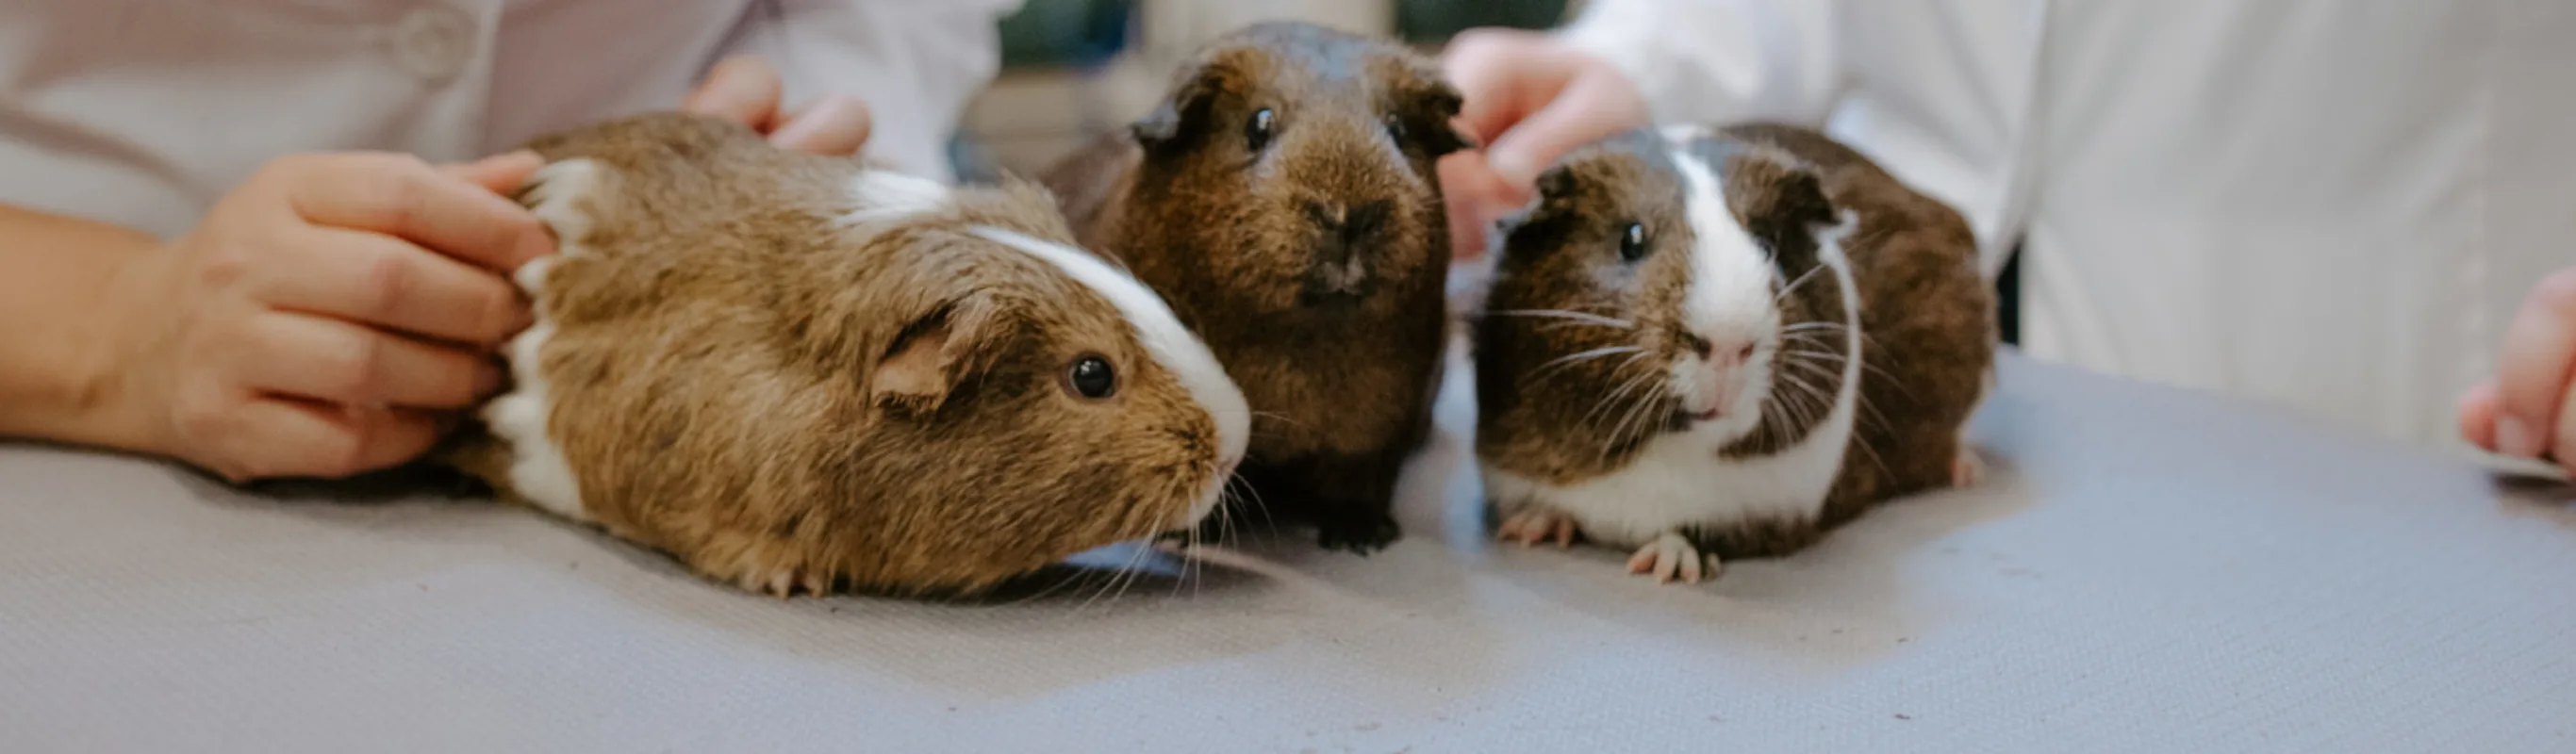 3 guinea pigs on a table